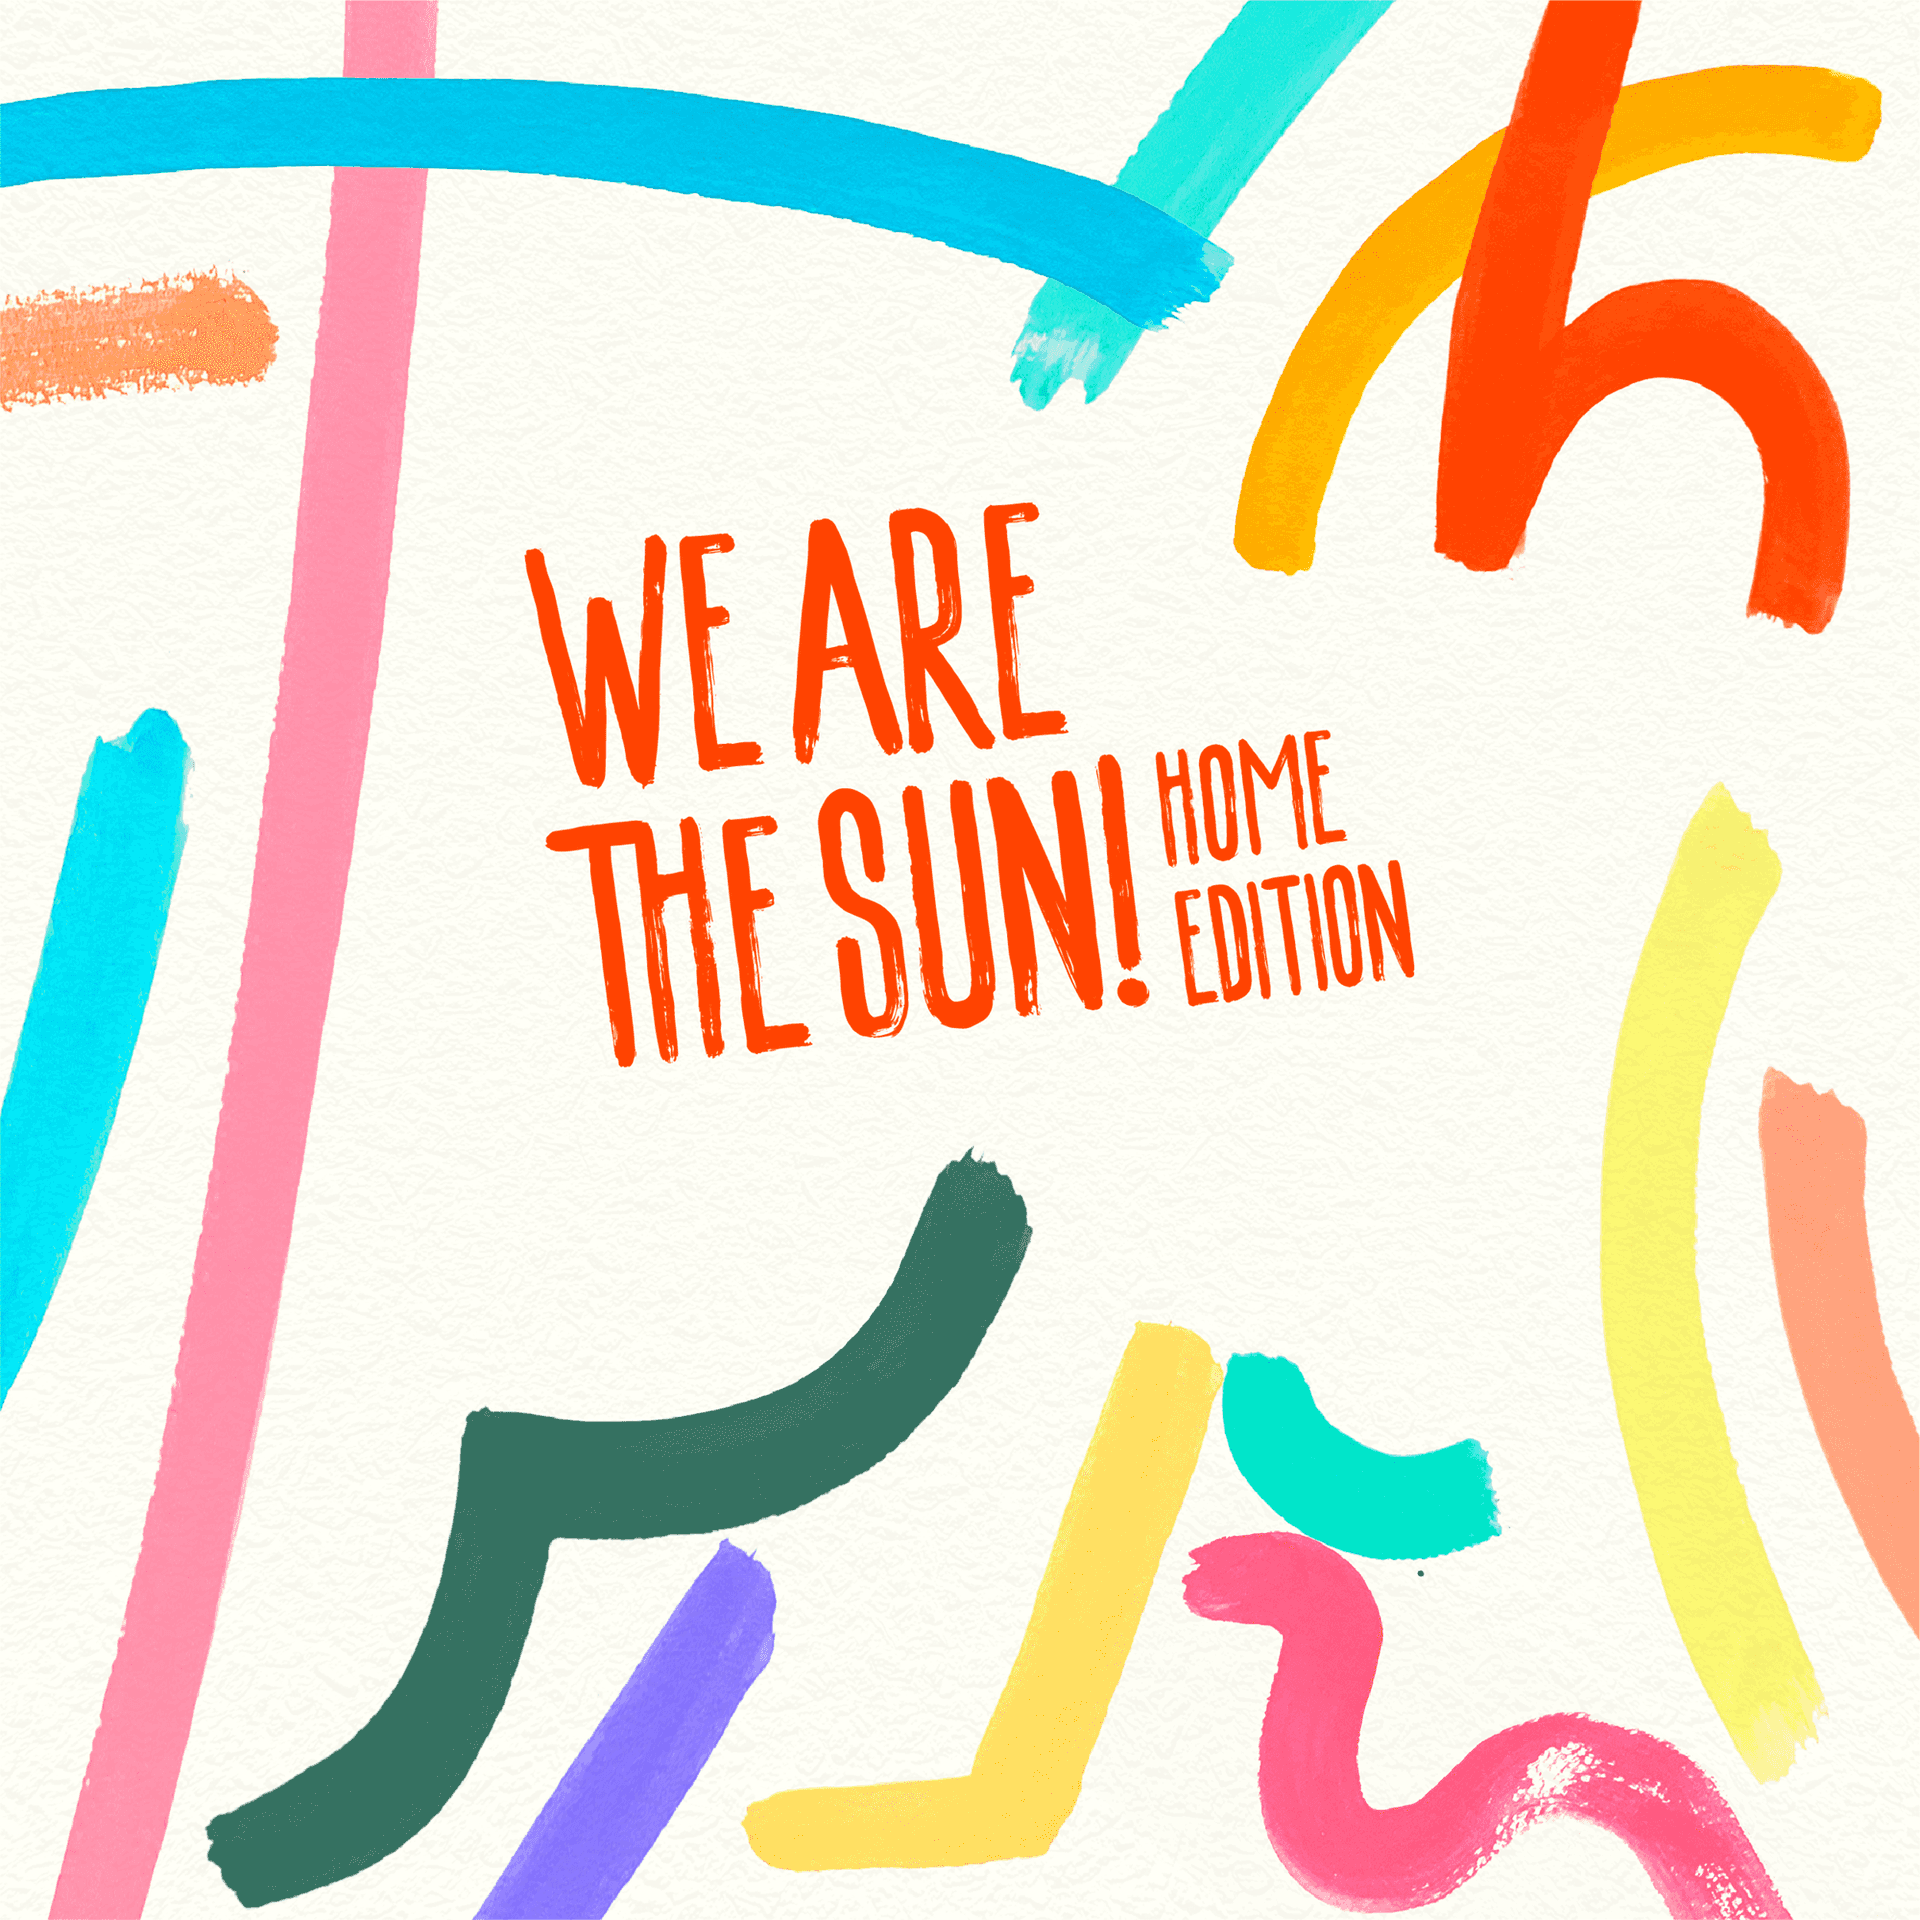 jacket of We Are the Sun! Home Edition